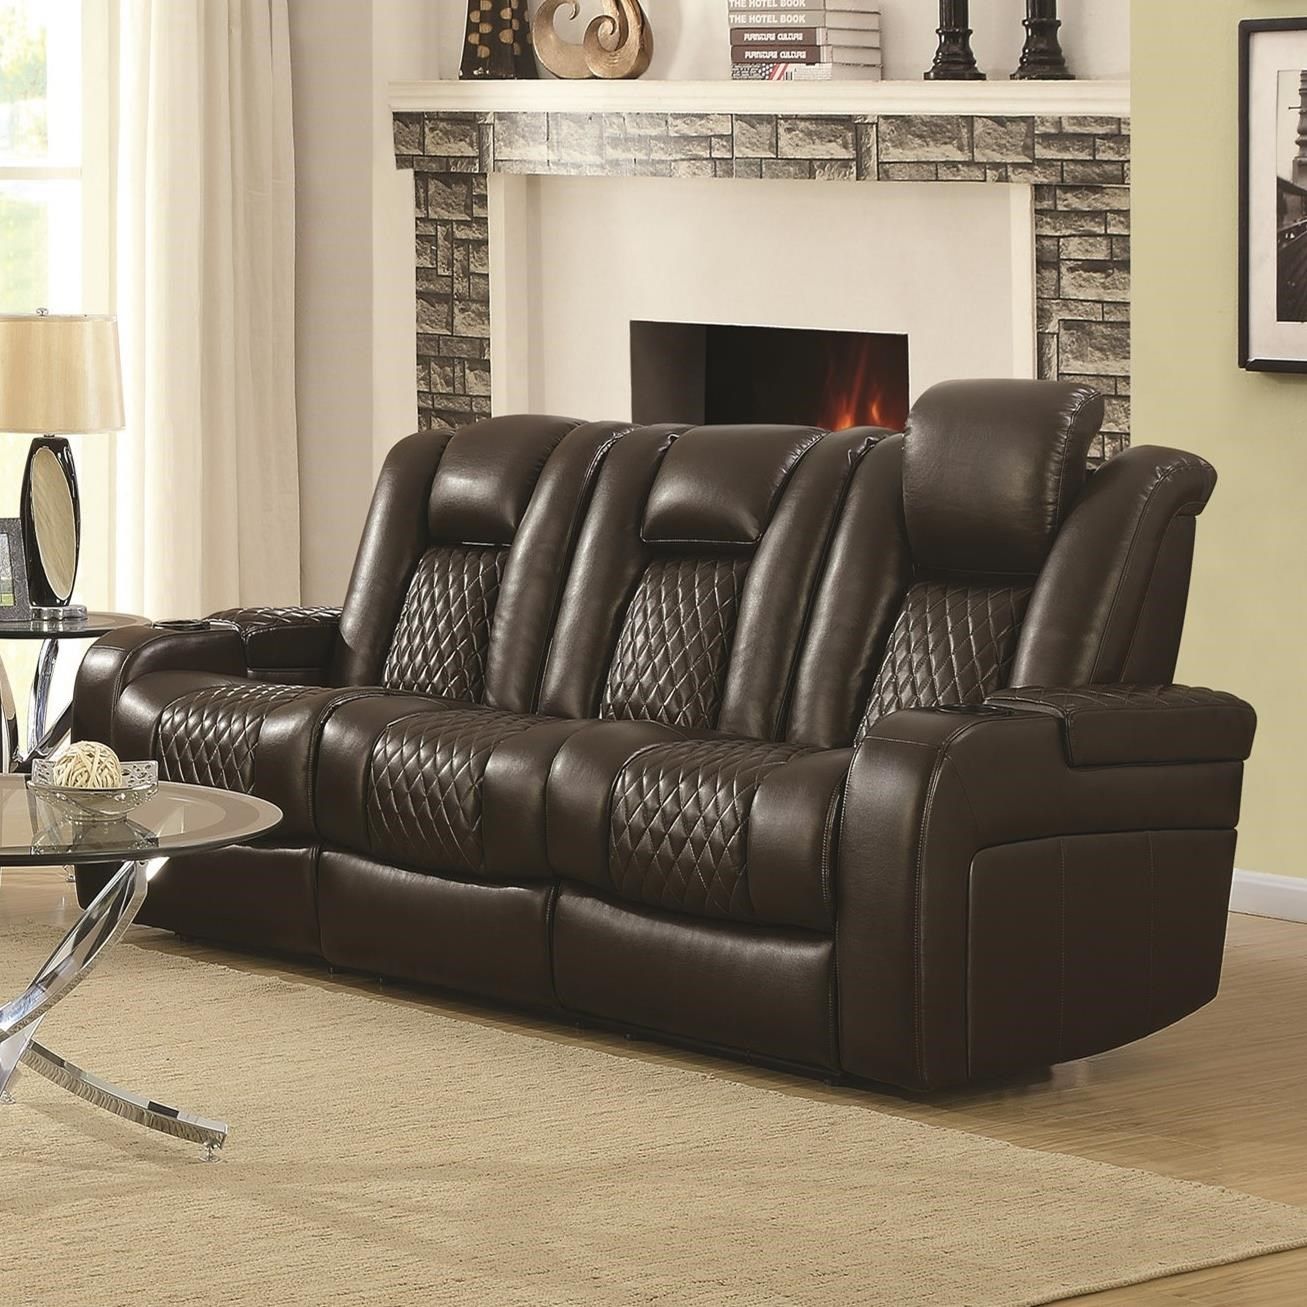 Delangelo Casual Power Reclining Sofa With Cup Holders Inside Expedition Brown Power Reclining Sofas (View 8 of 15)